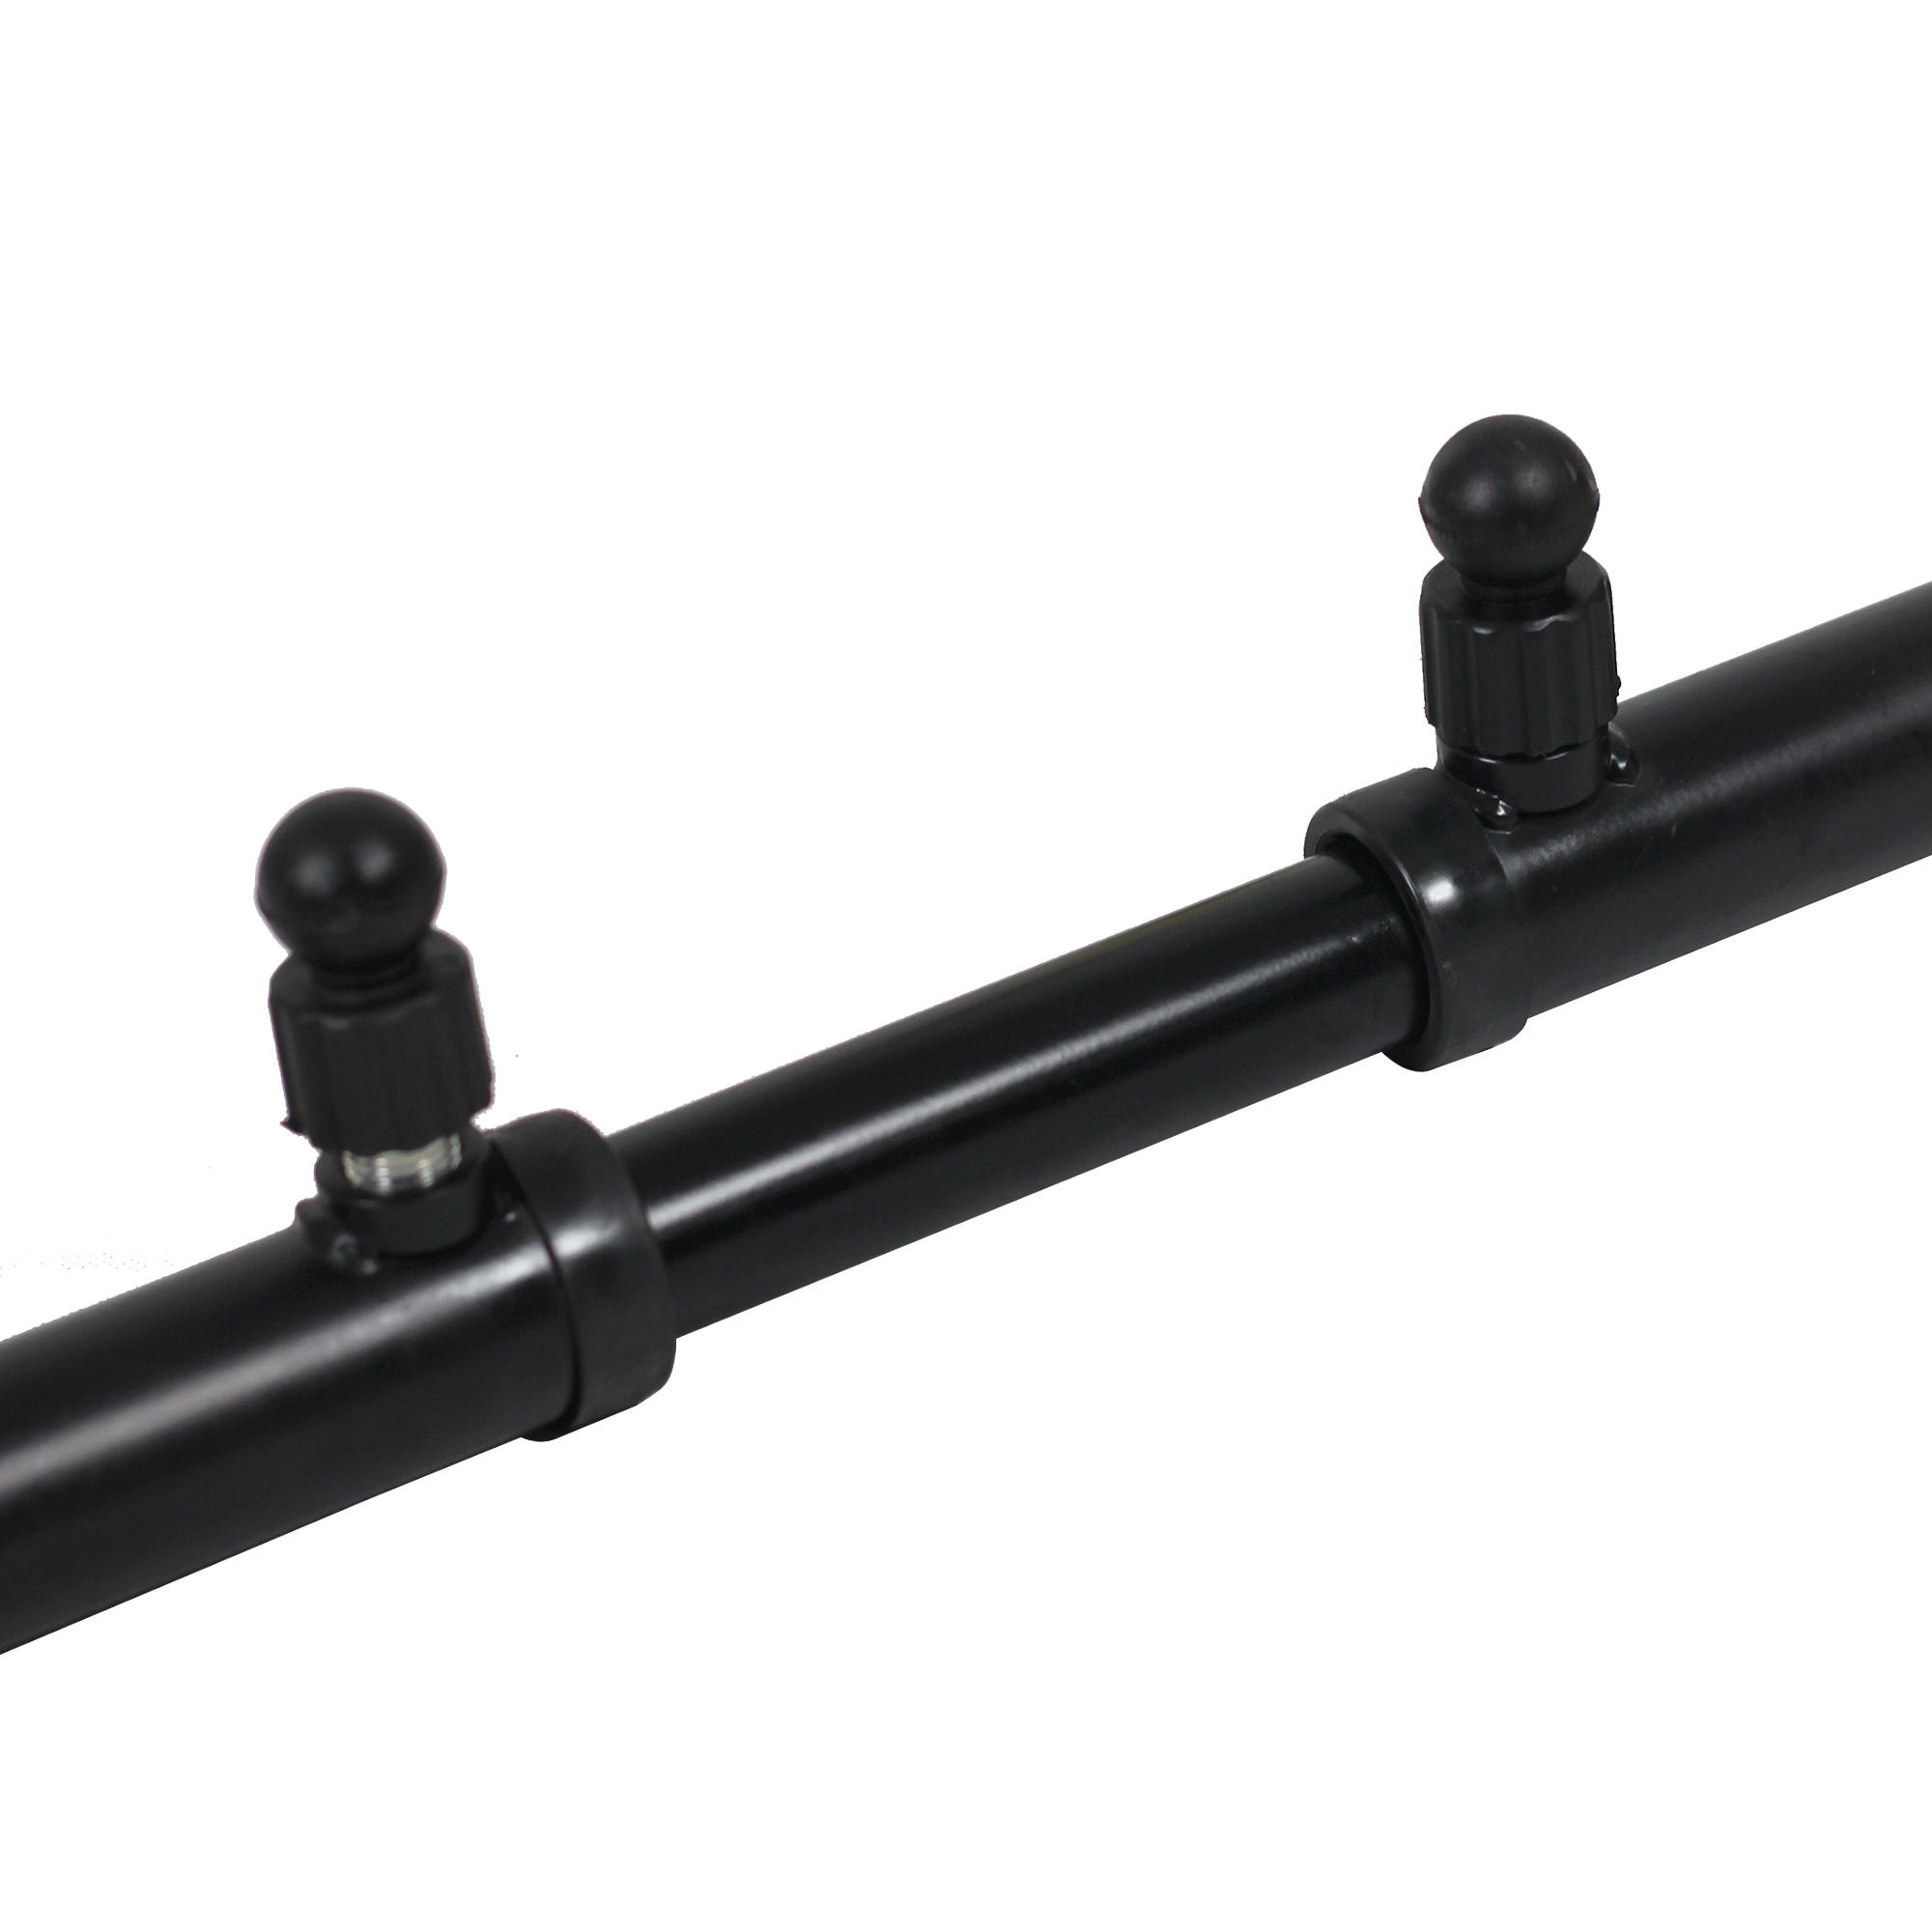  HY-E9021 Indoor Multi-function parallel bars